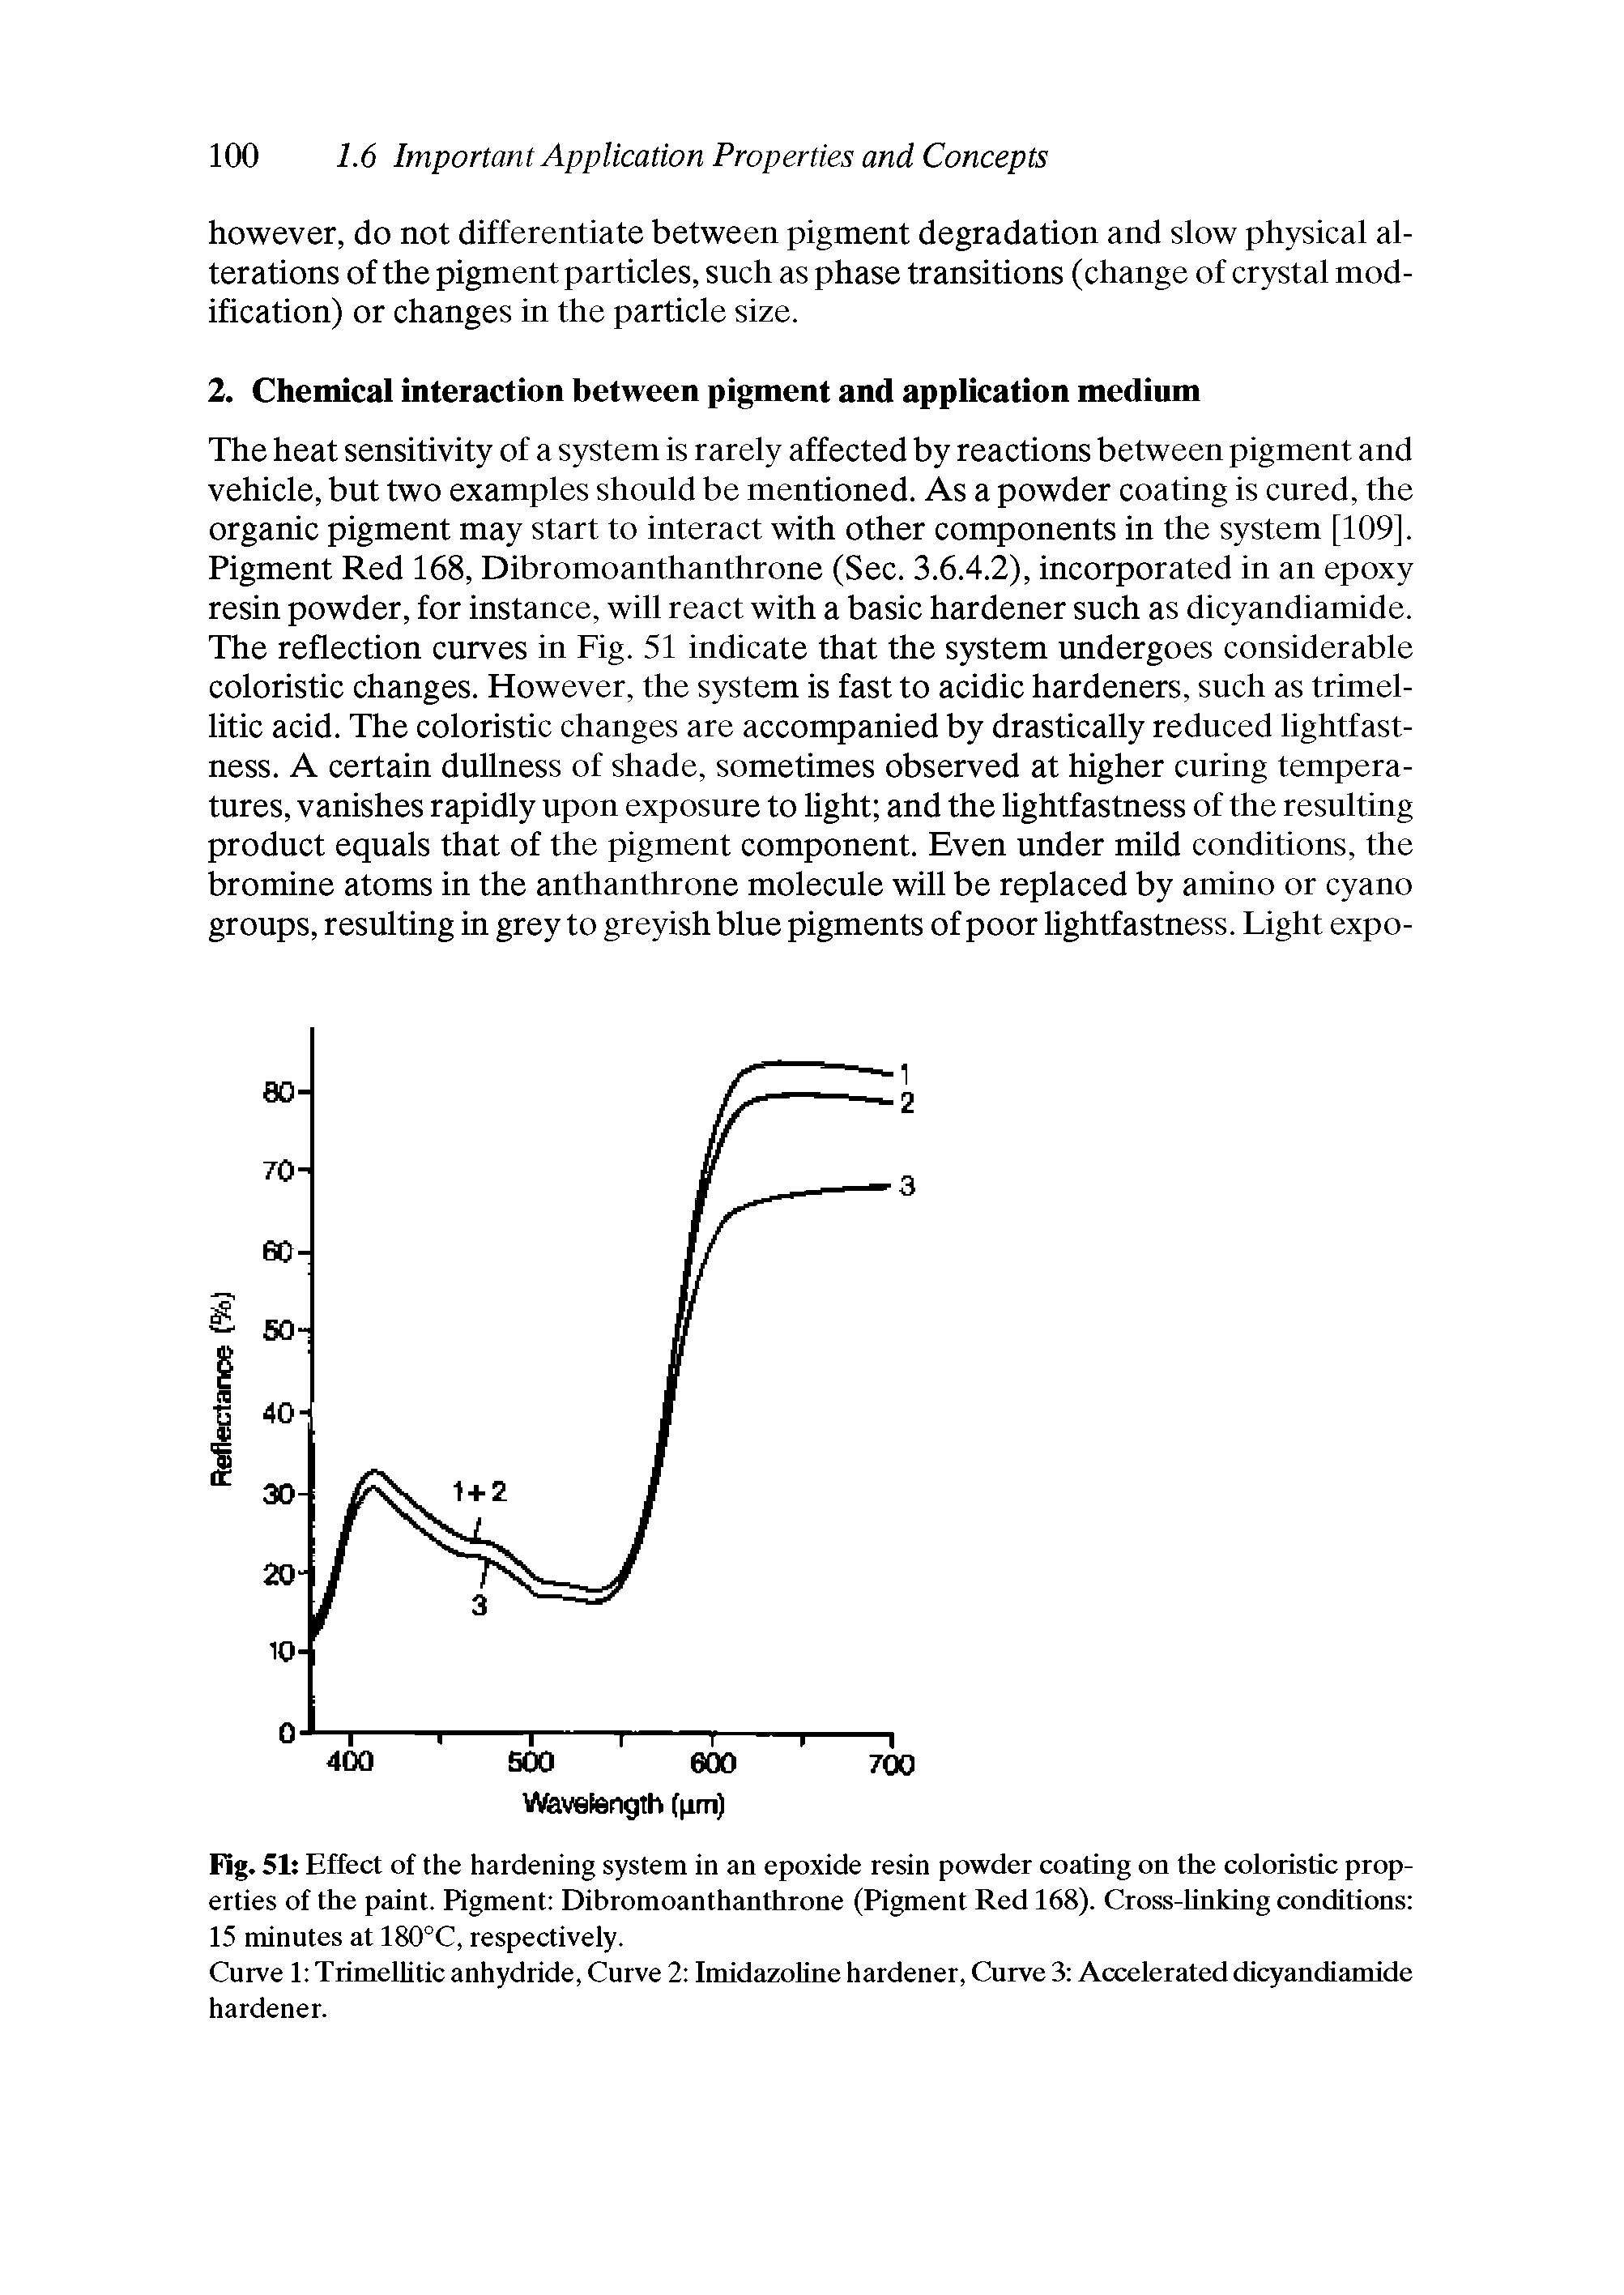 Fig.51 Effect of the hardening system in an epoxide resin powder coating on the coloristic properties of the paint. Pigment Dibromoanthanthrone (Pigment Red 168). Cross-linking conditions 15 minutes at 180°C, respectively.